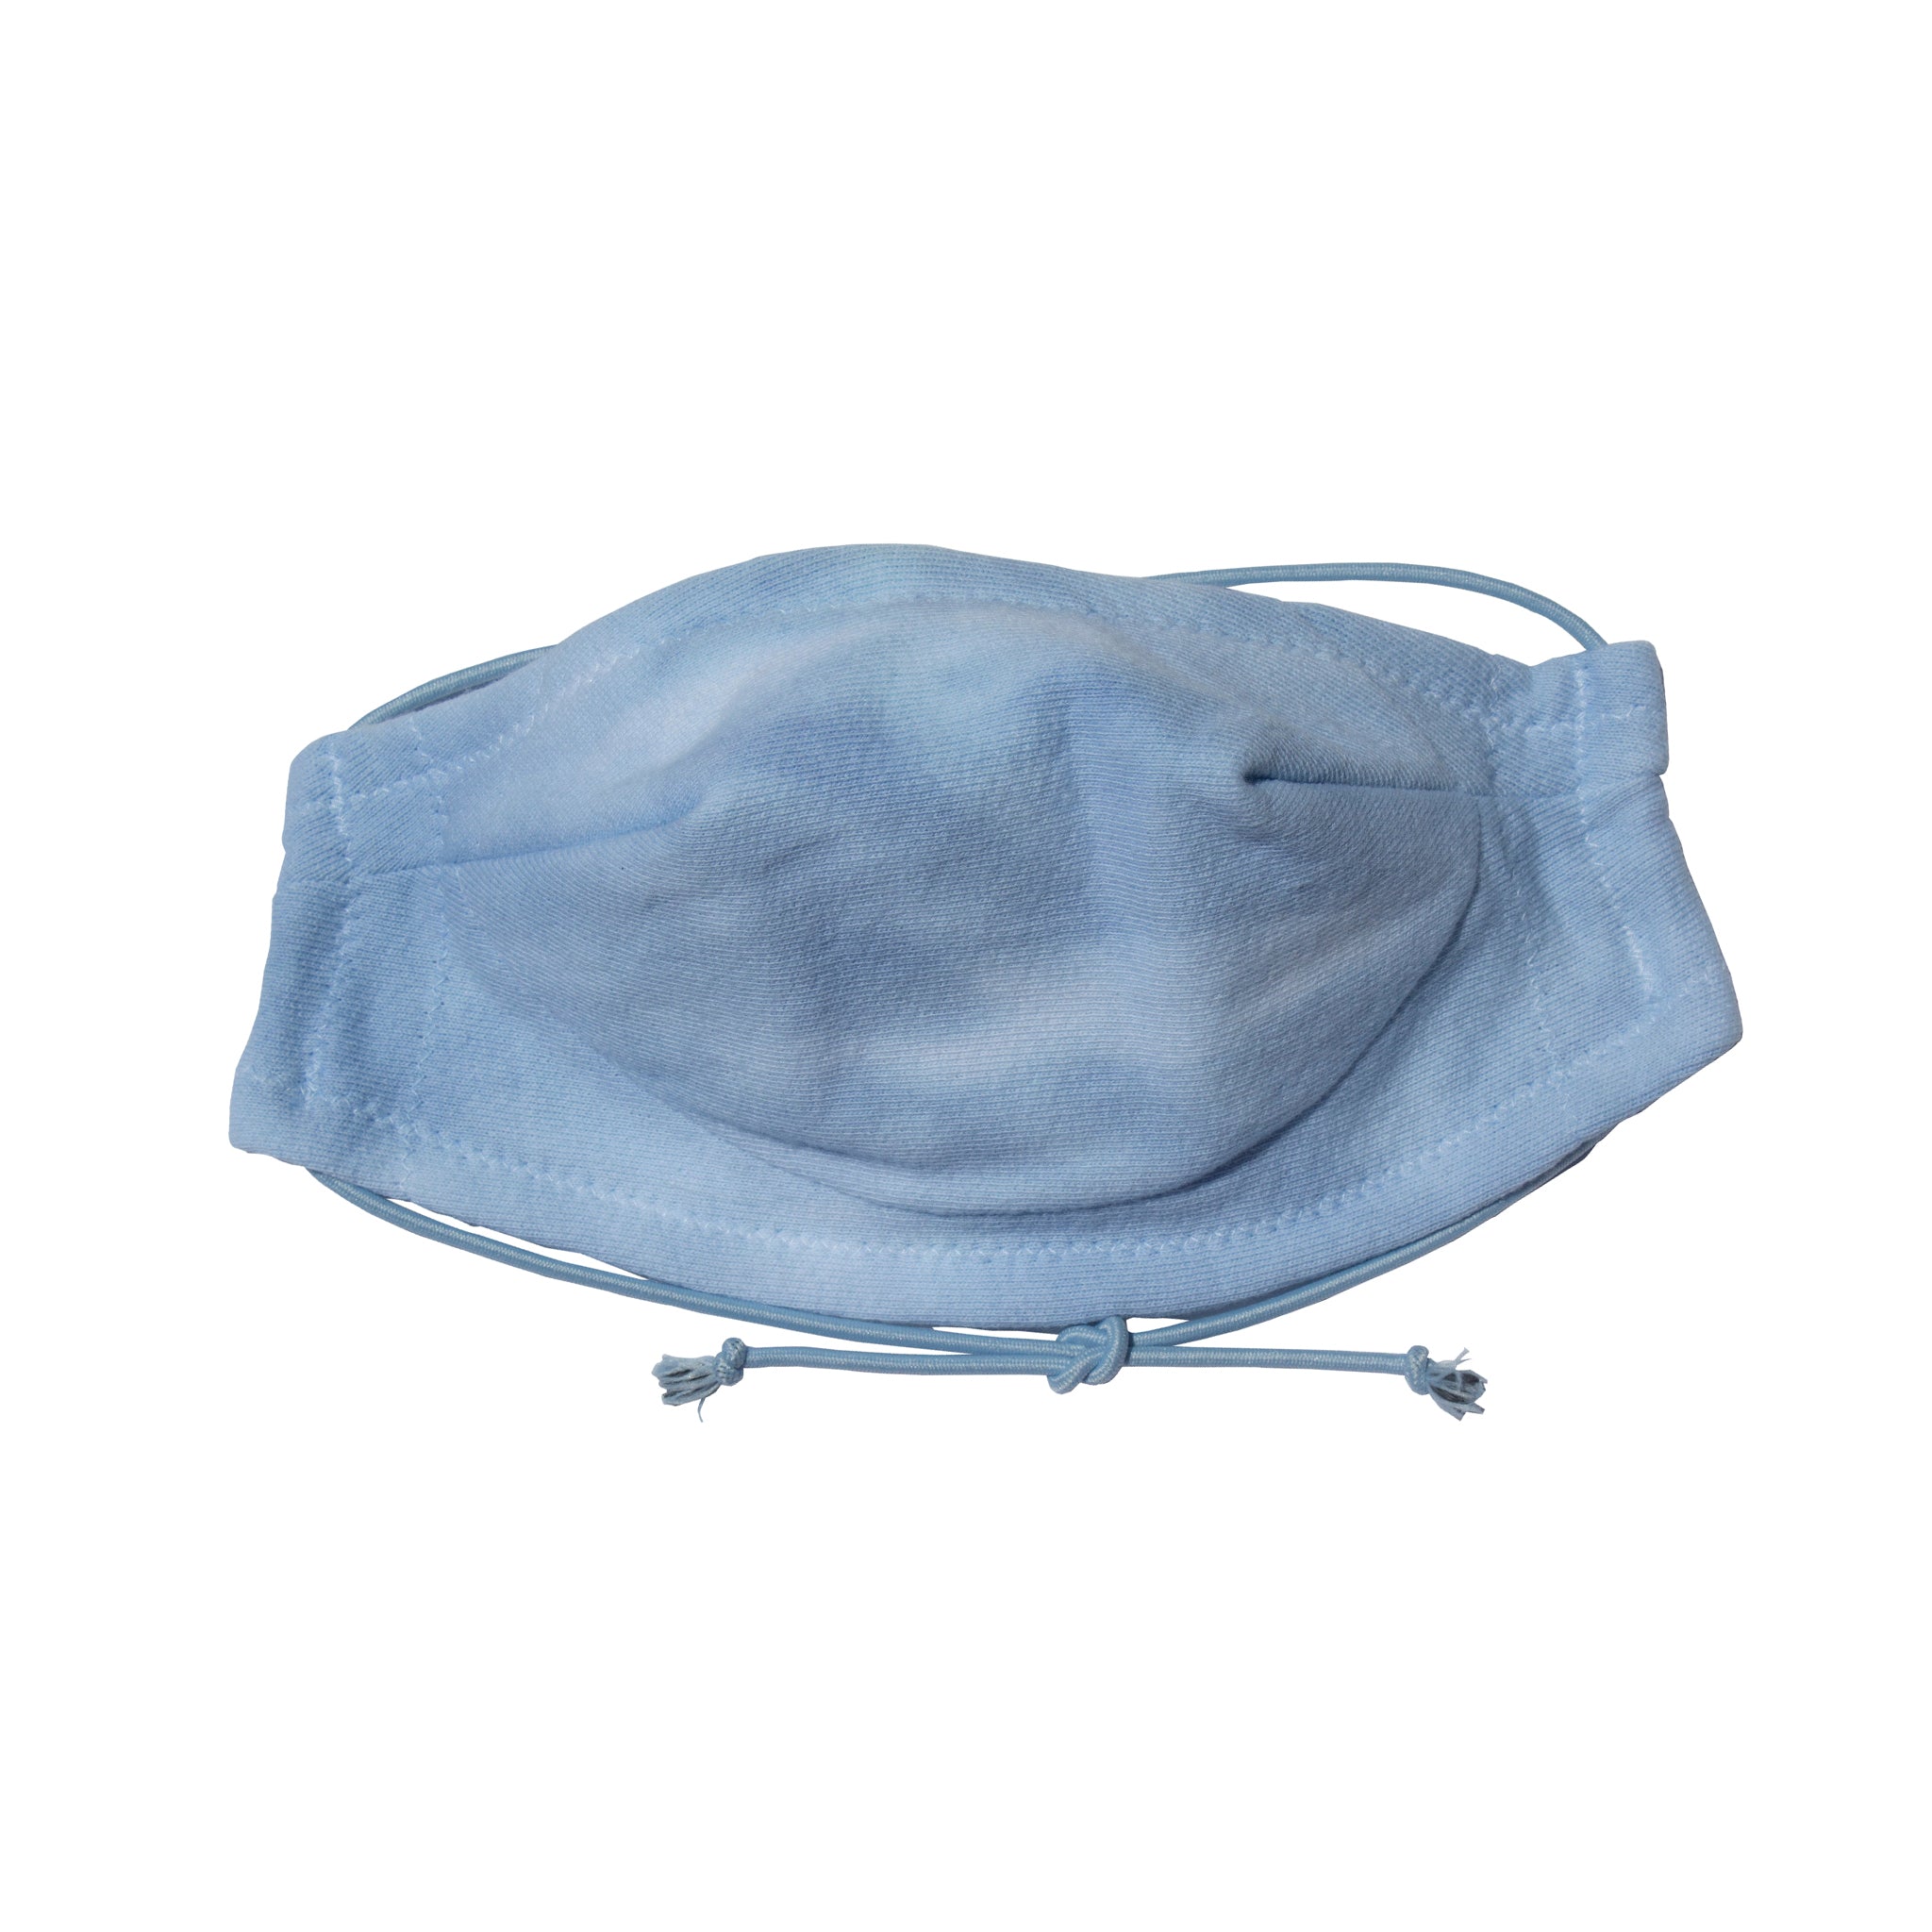 Safe and comfortable 100% cotton 5 layer Face Mask in Blue Cloud Wash. soft wire upper, no rough edges.